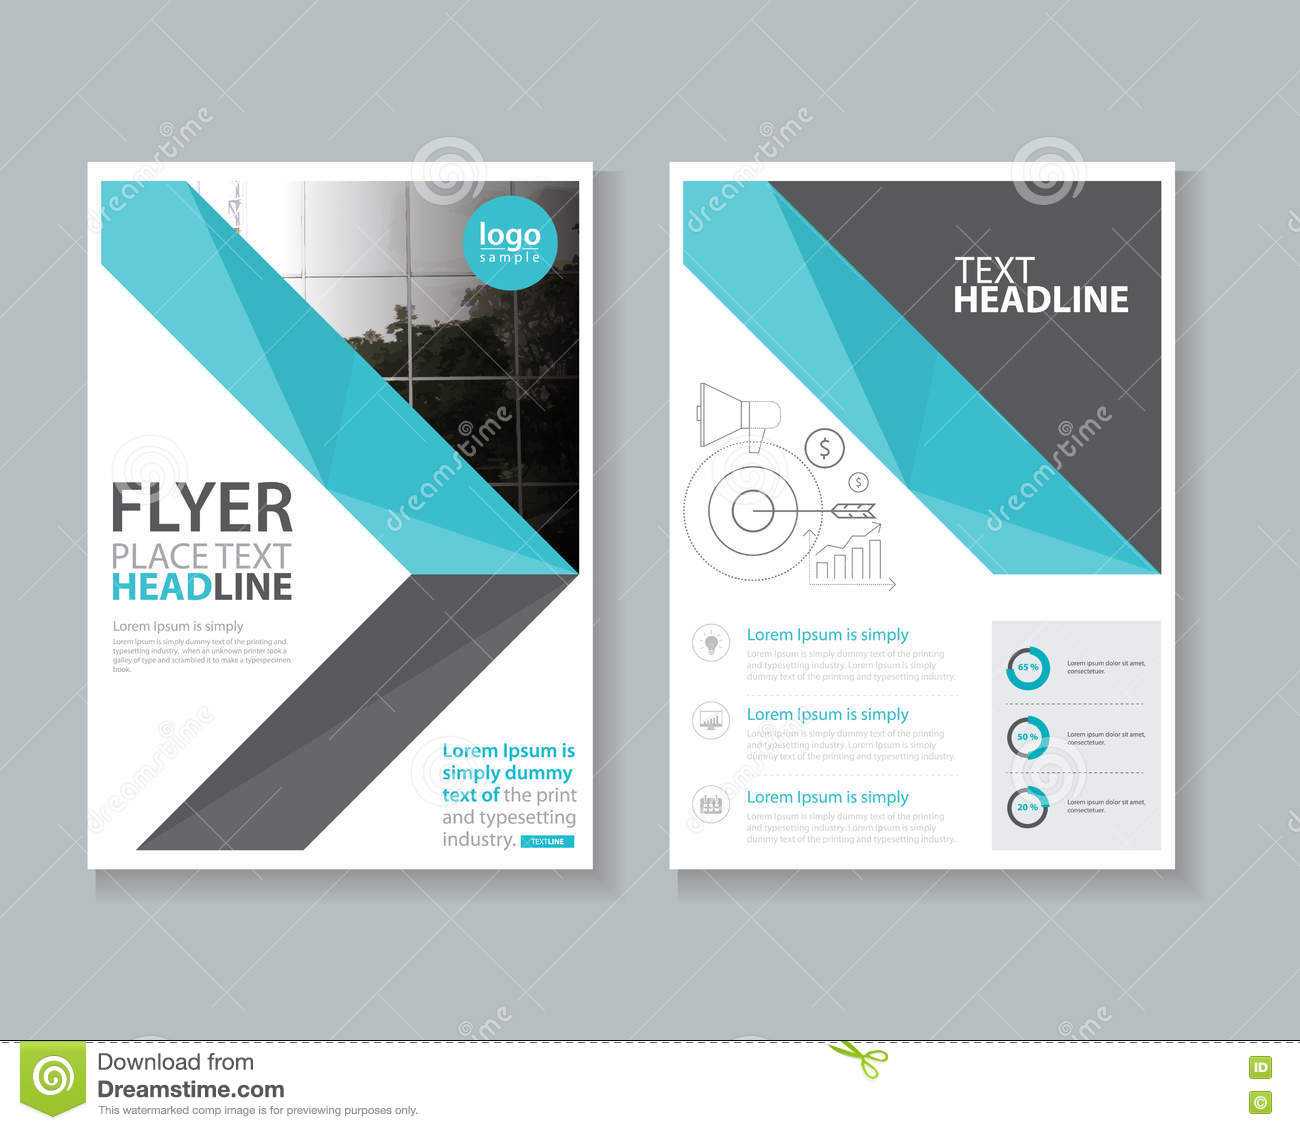 015 Word Cover Pages Template Ideas Page Brochure Flyer Pertaining To Word Report Cover Page Template